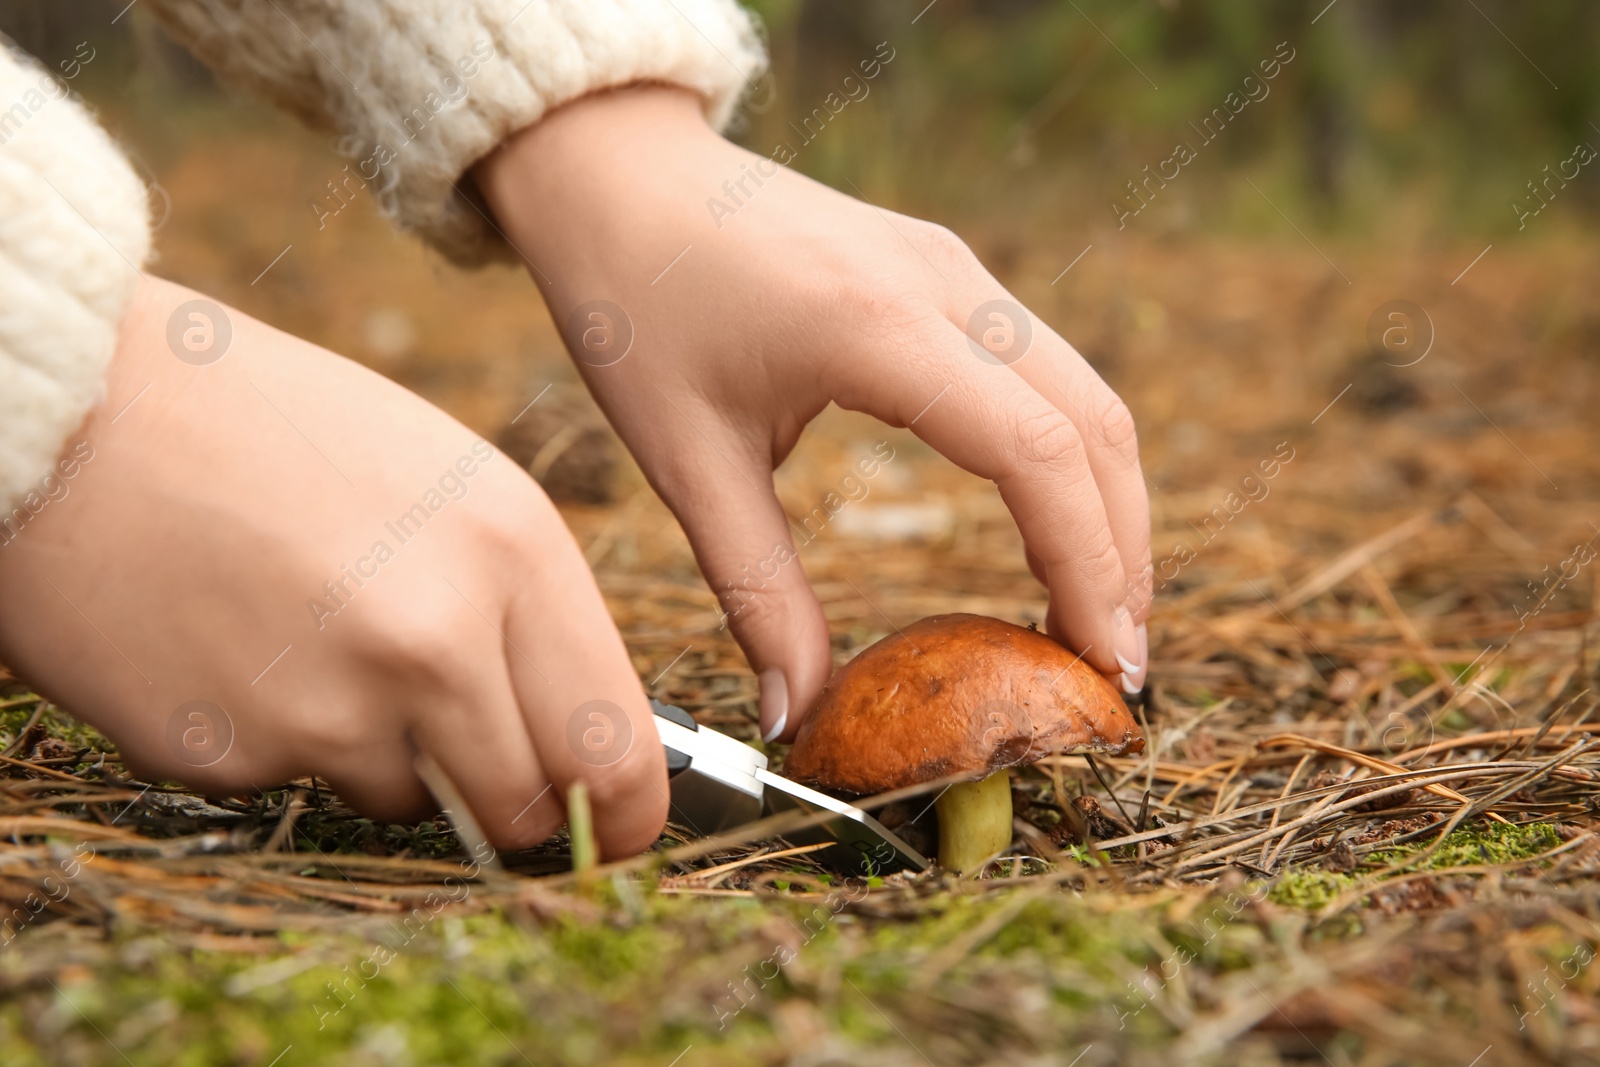 Photo of Woman cutting boletus mushroom with knife in forest, closeup